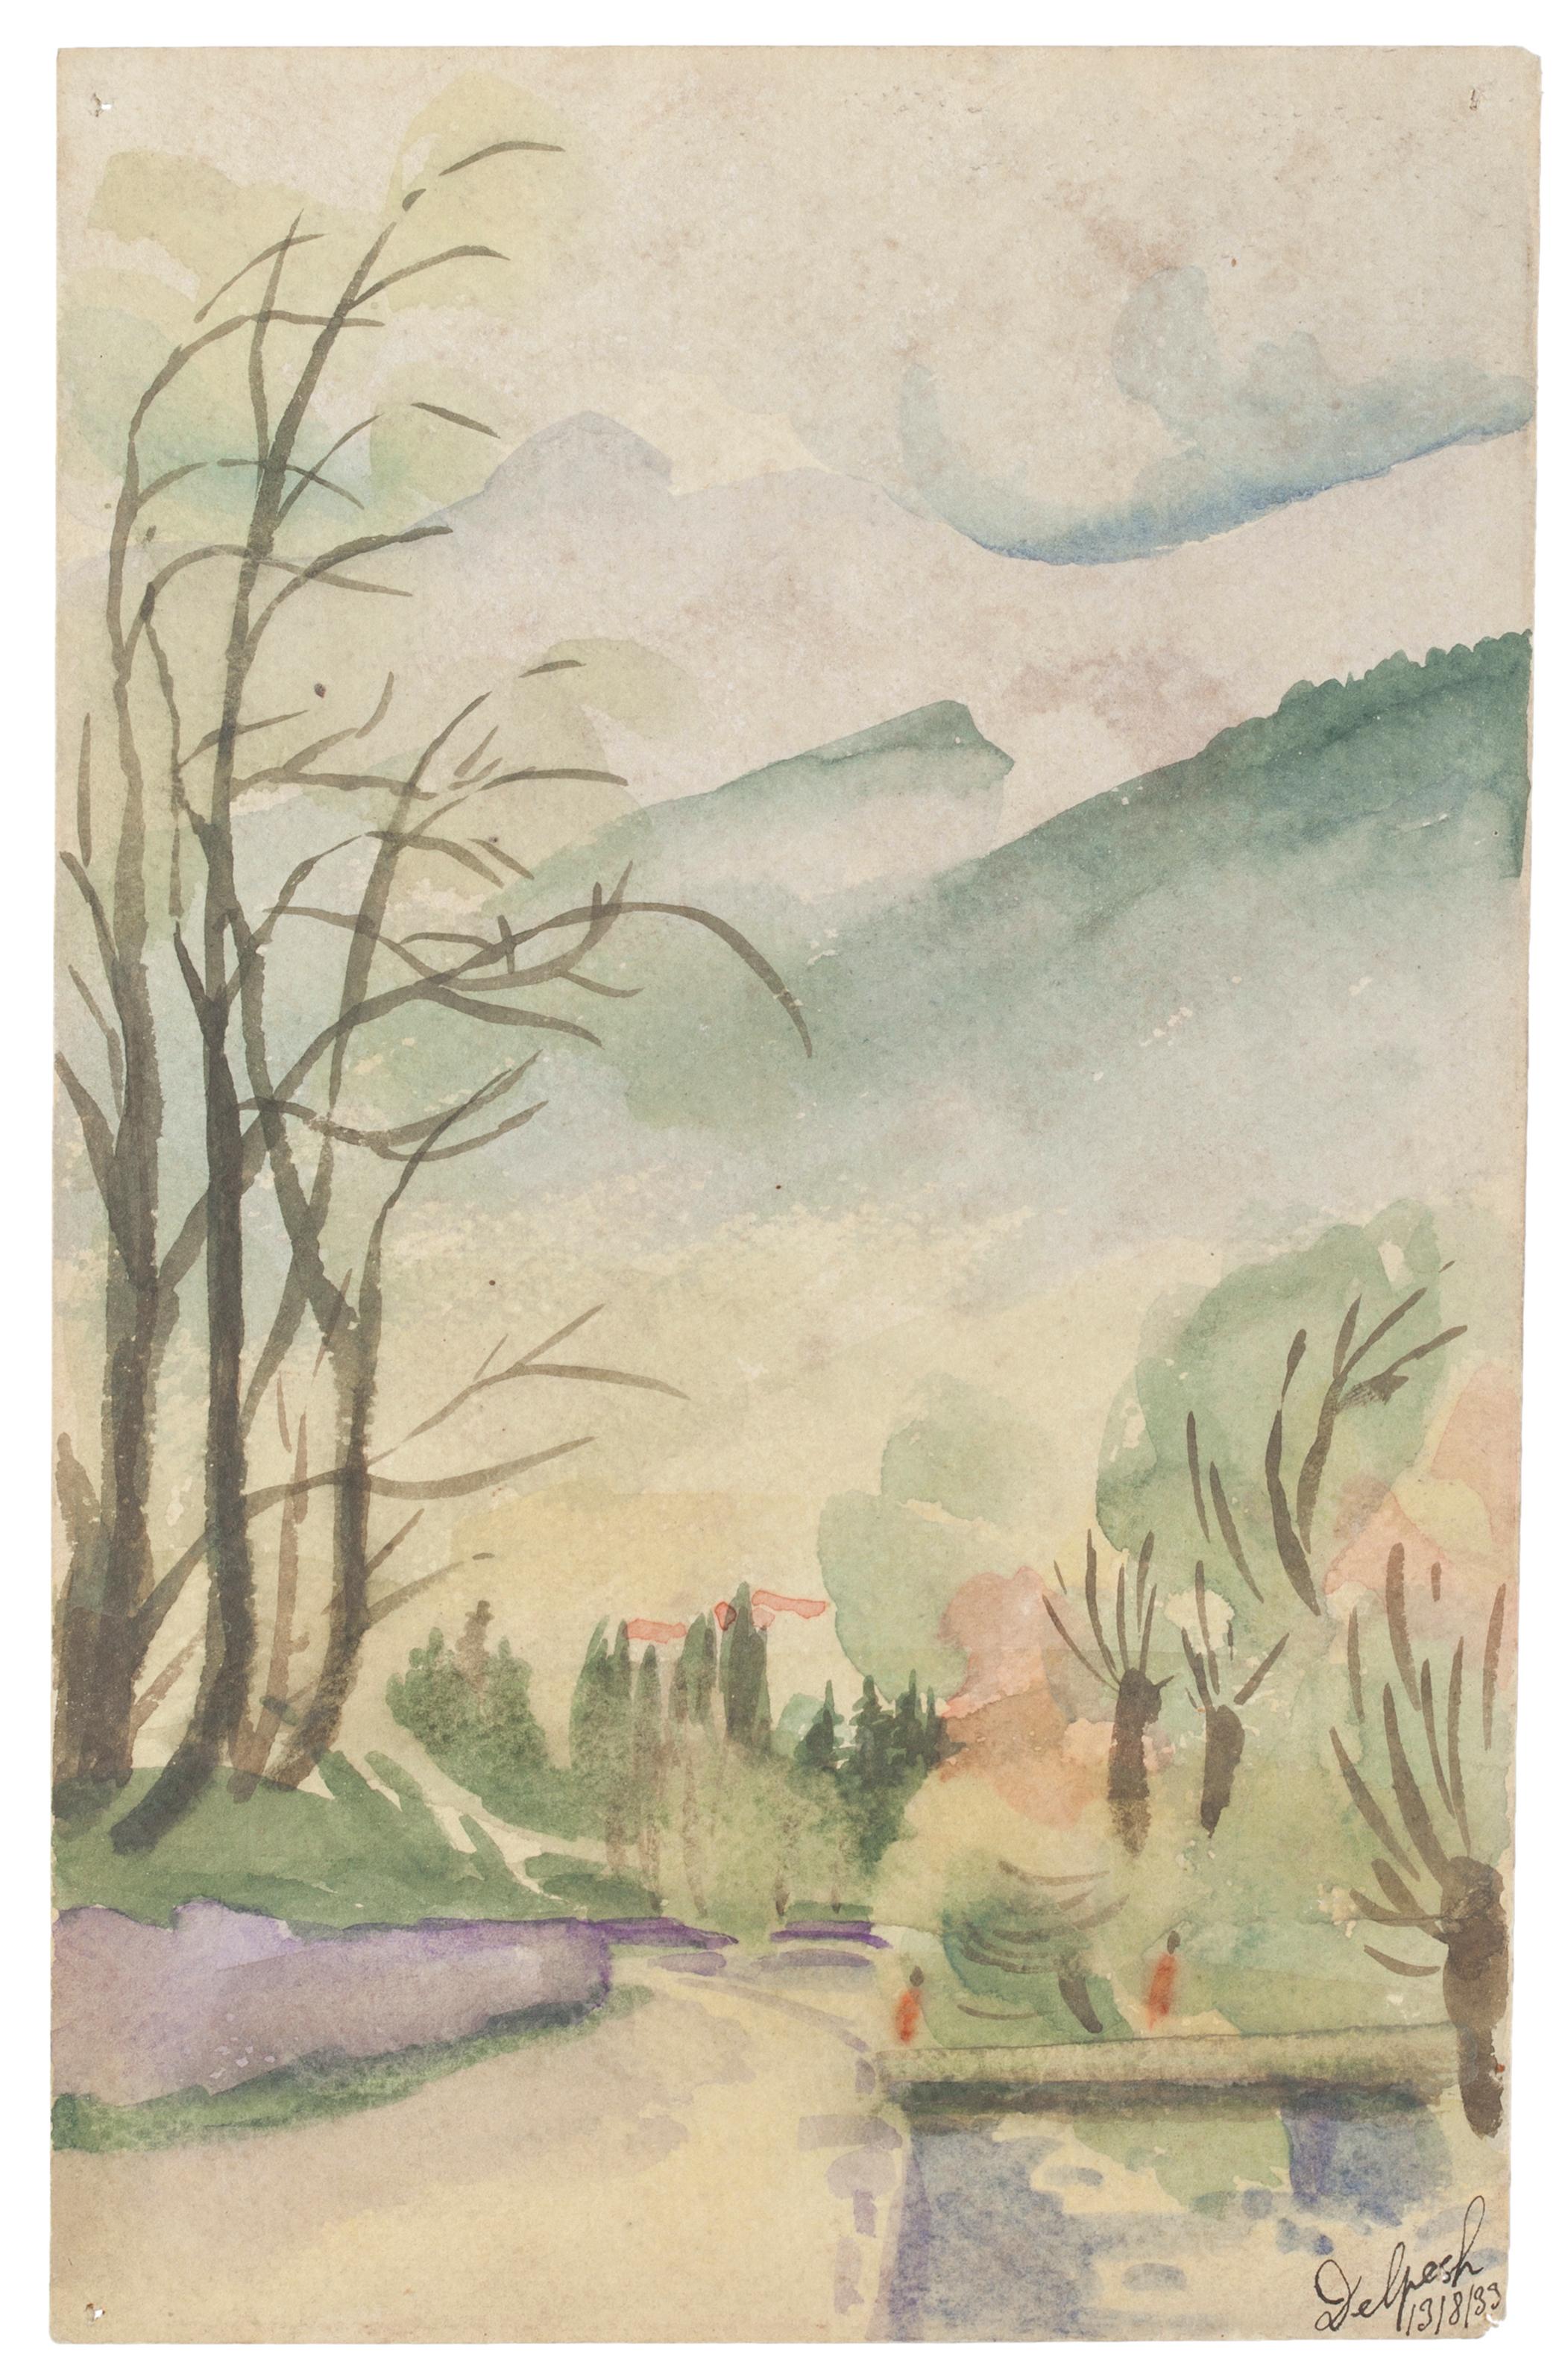 "Landscape" is an original drawing in watercolor on paper, realized by Jean Delpech (1916-1988). 
The state of preservation of the artwork is very good.

Sheet dimension: 23.5 x 15 cm.

The artwork represents beautiful landscape with vivid color,